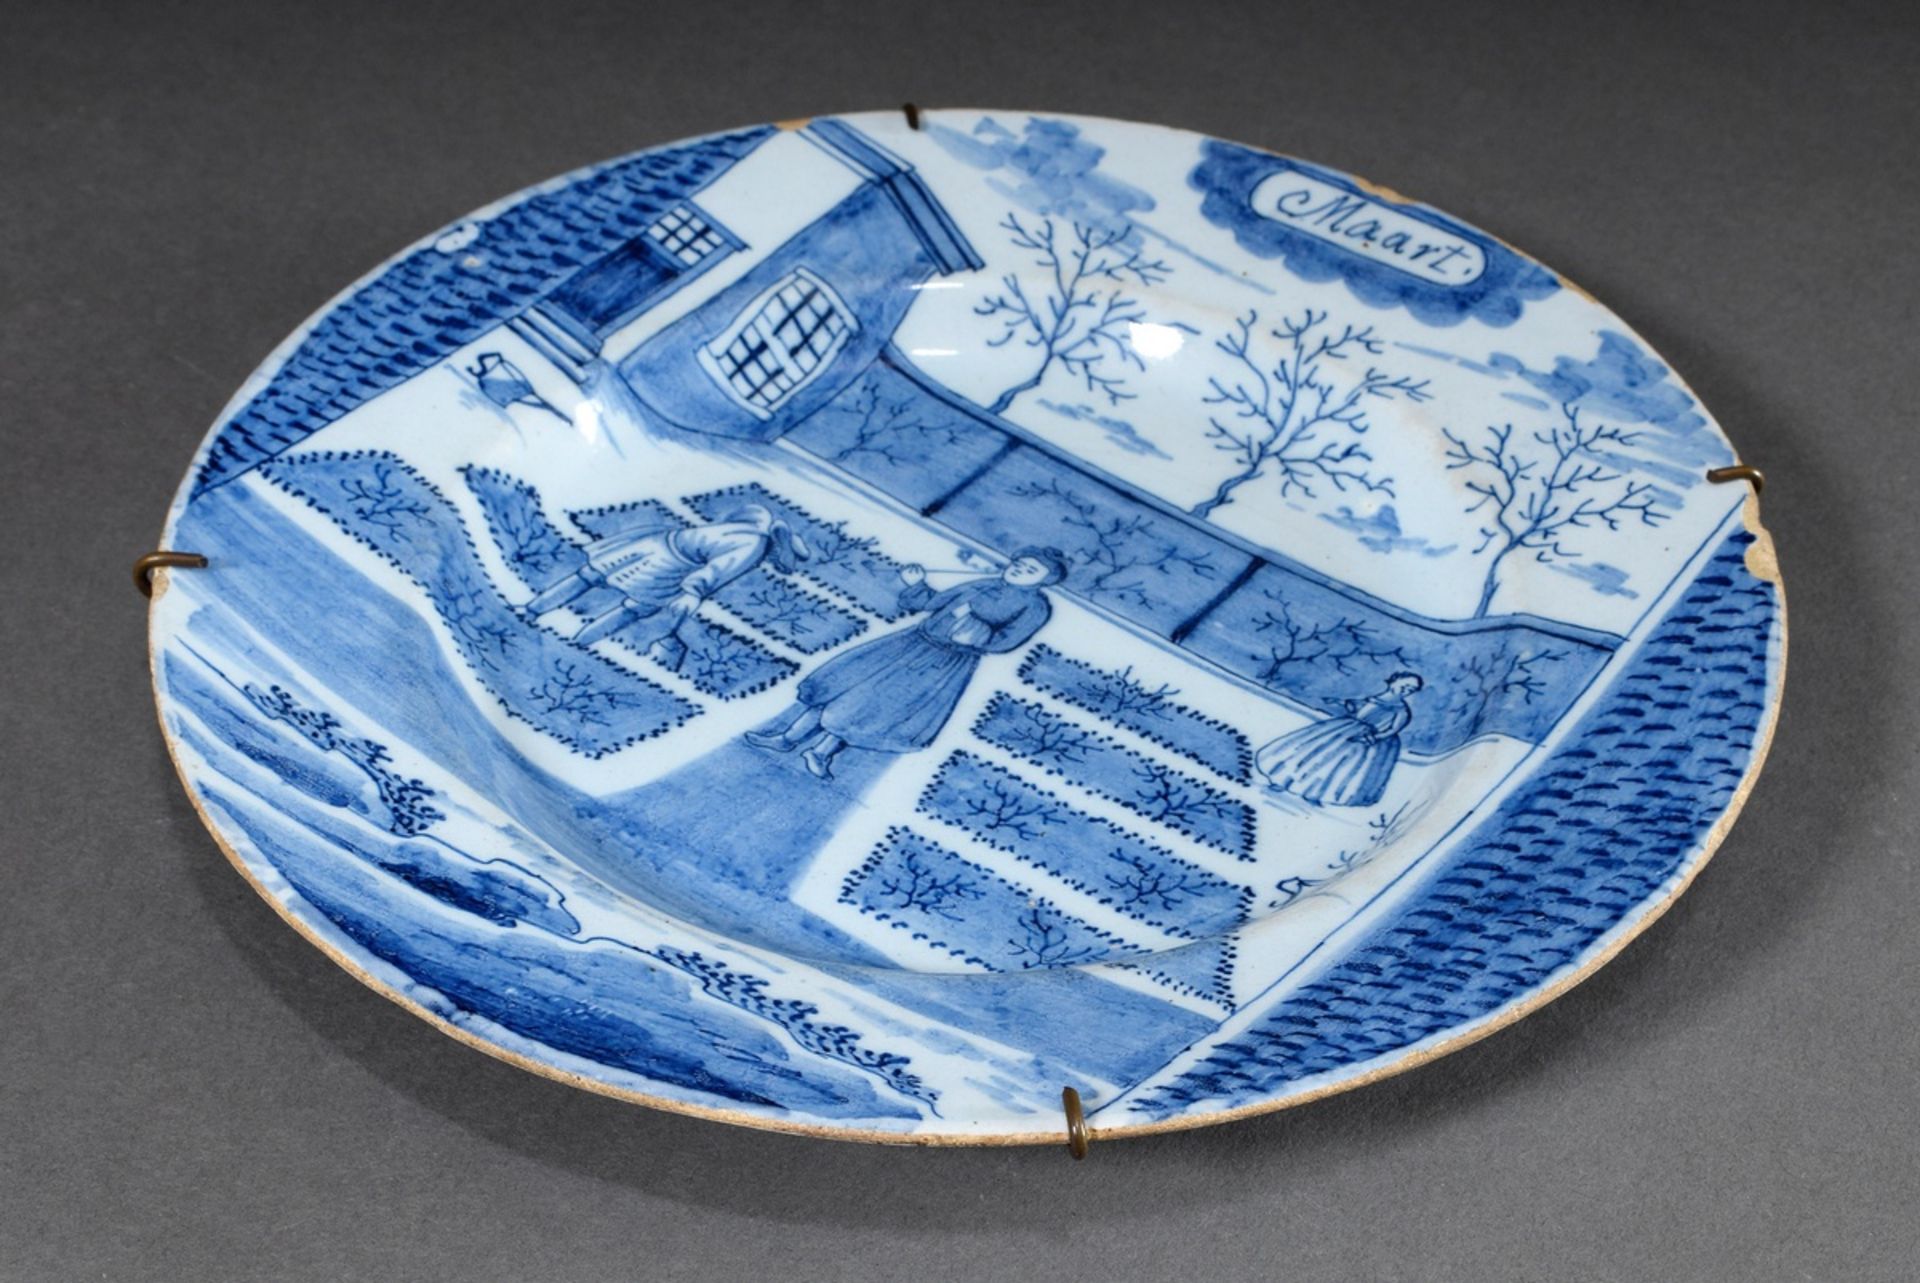 Delft faience plate "Maart" from monthly series with blue painting decor "Scene in the garden", De 